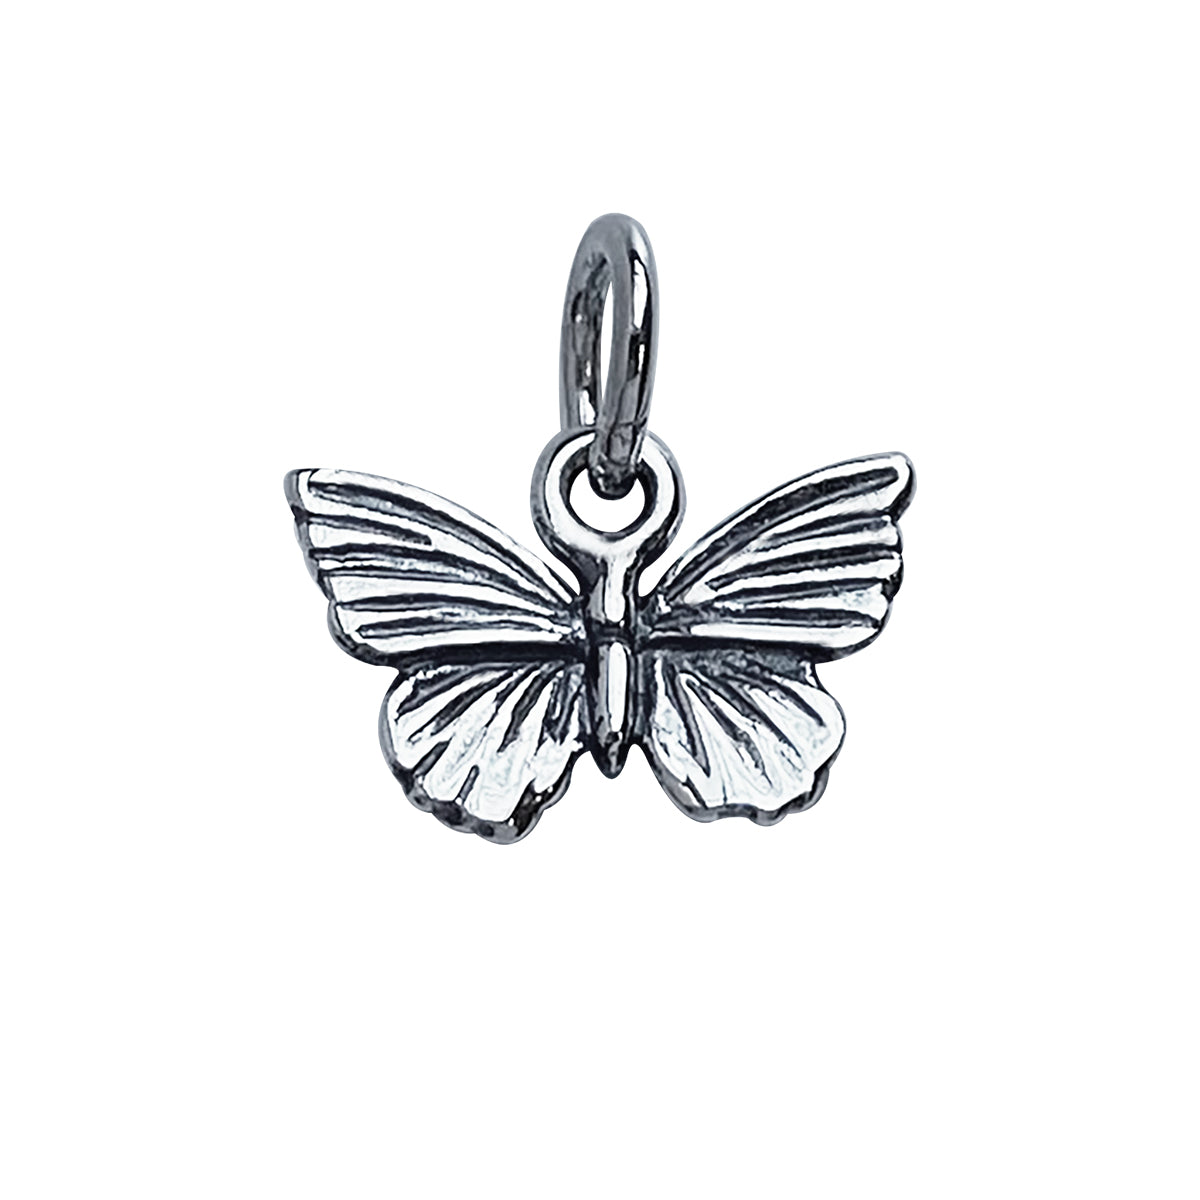 Miniature sterling silver butterfly charm at Charmarama